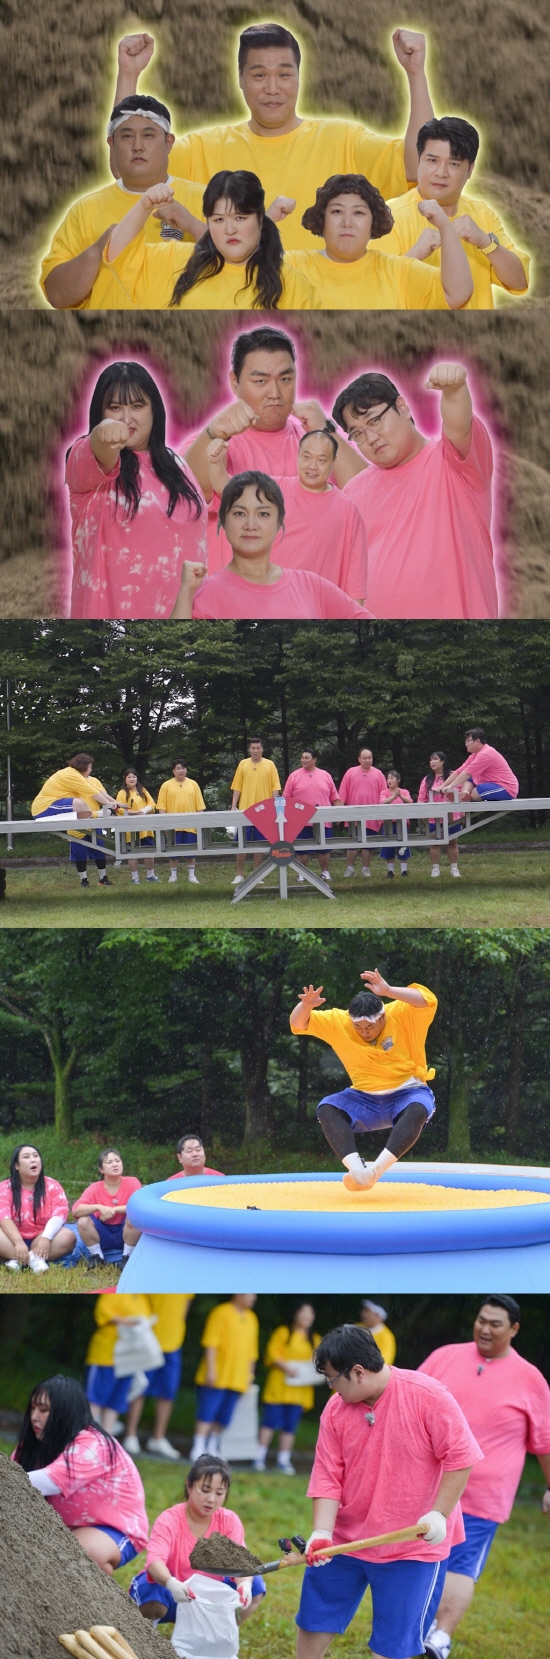 Broadcaster Park Na-rae exudes fairy beautyOn the 8th, SBS  ⁇  big man Survival Island - Chi-pa!Seo Jang-hoon watched members with a weight total of 1.2 tons and watched a lot of broadcasts so far, but he was amazed that it was the first time to have such a full combination.It turns out that only one member of the park Na-rae has a weight of double digits, and everyone is in shock.Park Na-rae, who seemed to be poisonous among the big men and emanated a fairy-tale  ⁇   ⁇   ⁇   ⁇   ⁇   ⁇ , said, Why are you so dry?  ⁇   ⁇  Chi-pa! I gave thanks and gave a loud laugh.In order to win the first mission, members who are struggling in heavy rains have been predicted.For a while, 10 big men came to the game fiercely while being wet with sweat and rainwater.In the unusual appearance of Seo Jang-hoon, who participated in outdoor entertainment in six years, Park Na-rae is the first to see Seo Jang-hoon move like that after the national team.I found out that I liked outdoor entertainment, and I admired the scene.Next, Mirage and Na Sun-wook will show a weight match at the super-sized seesaw.Kager ⁇  no Tsuji: Inemuri Iwane Edo Z ⁇ shi.In addition to this, only the weight of his own table tennis ball over 2,000 big man is a member who does well.Kager ⁇  no Tsuji: Inemuri Iwane Edo Z ⁇ shi, a member who will catch the eye of viewers on Survival Island, the big size of big men who could not be seen anywhere.The big man who challenged the previous scale game mission is heavy rebellion at 4:45 pm on Sunday, 8th, SBS  ⁇  big man Survival Island - Chi-pa!Photos by SBS